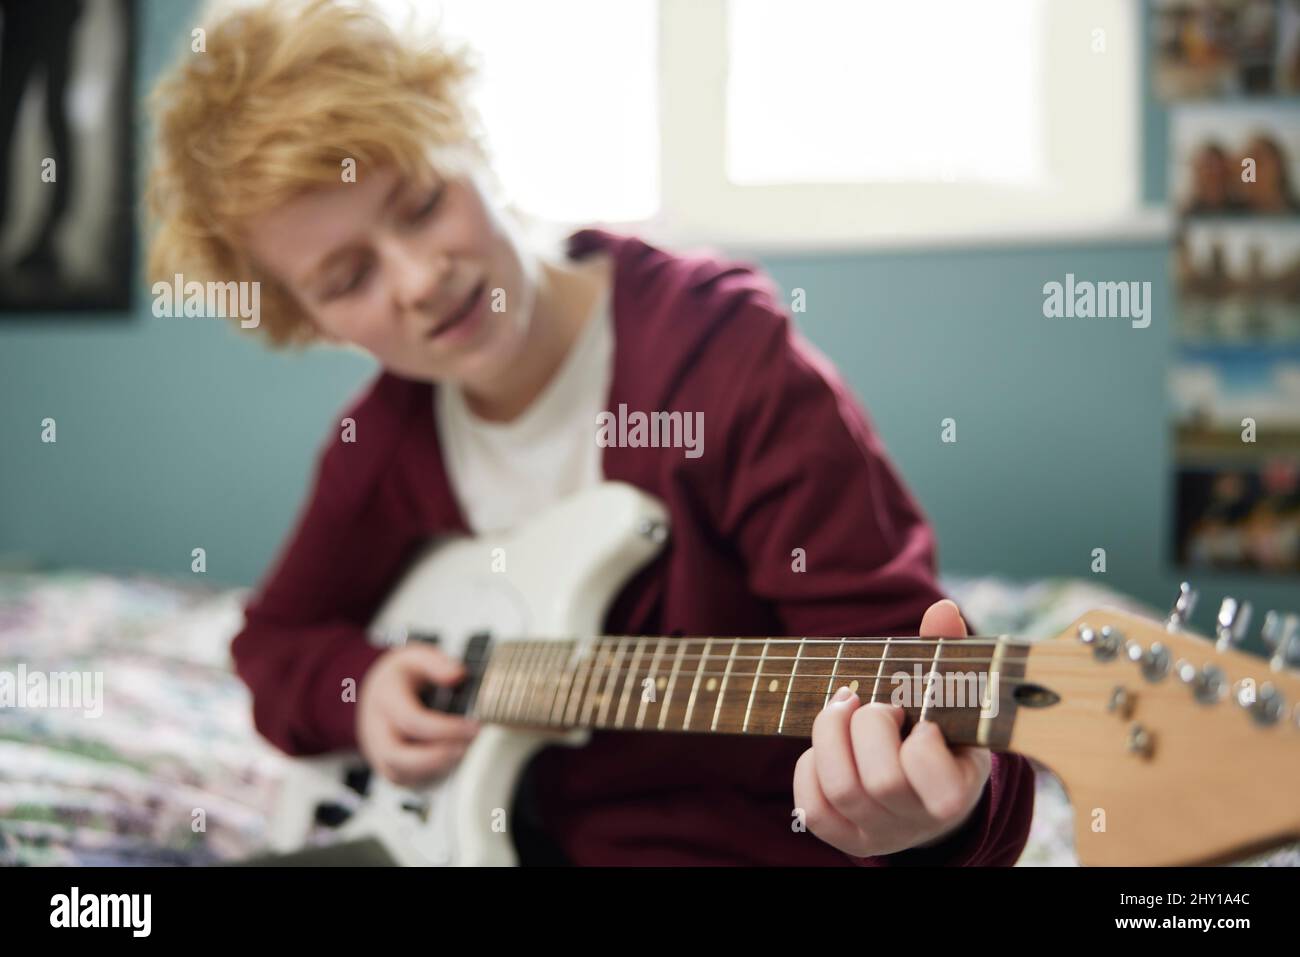 Teenage Girl Sitting On Bed Learning To Play Electric Guitar In Bedroom Stock Photo